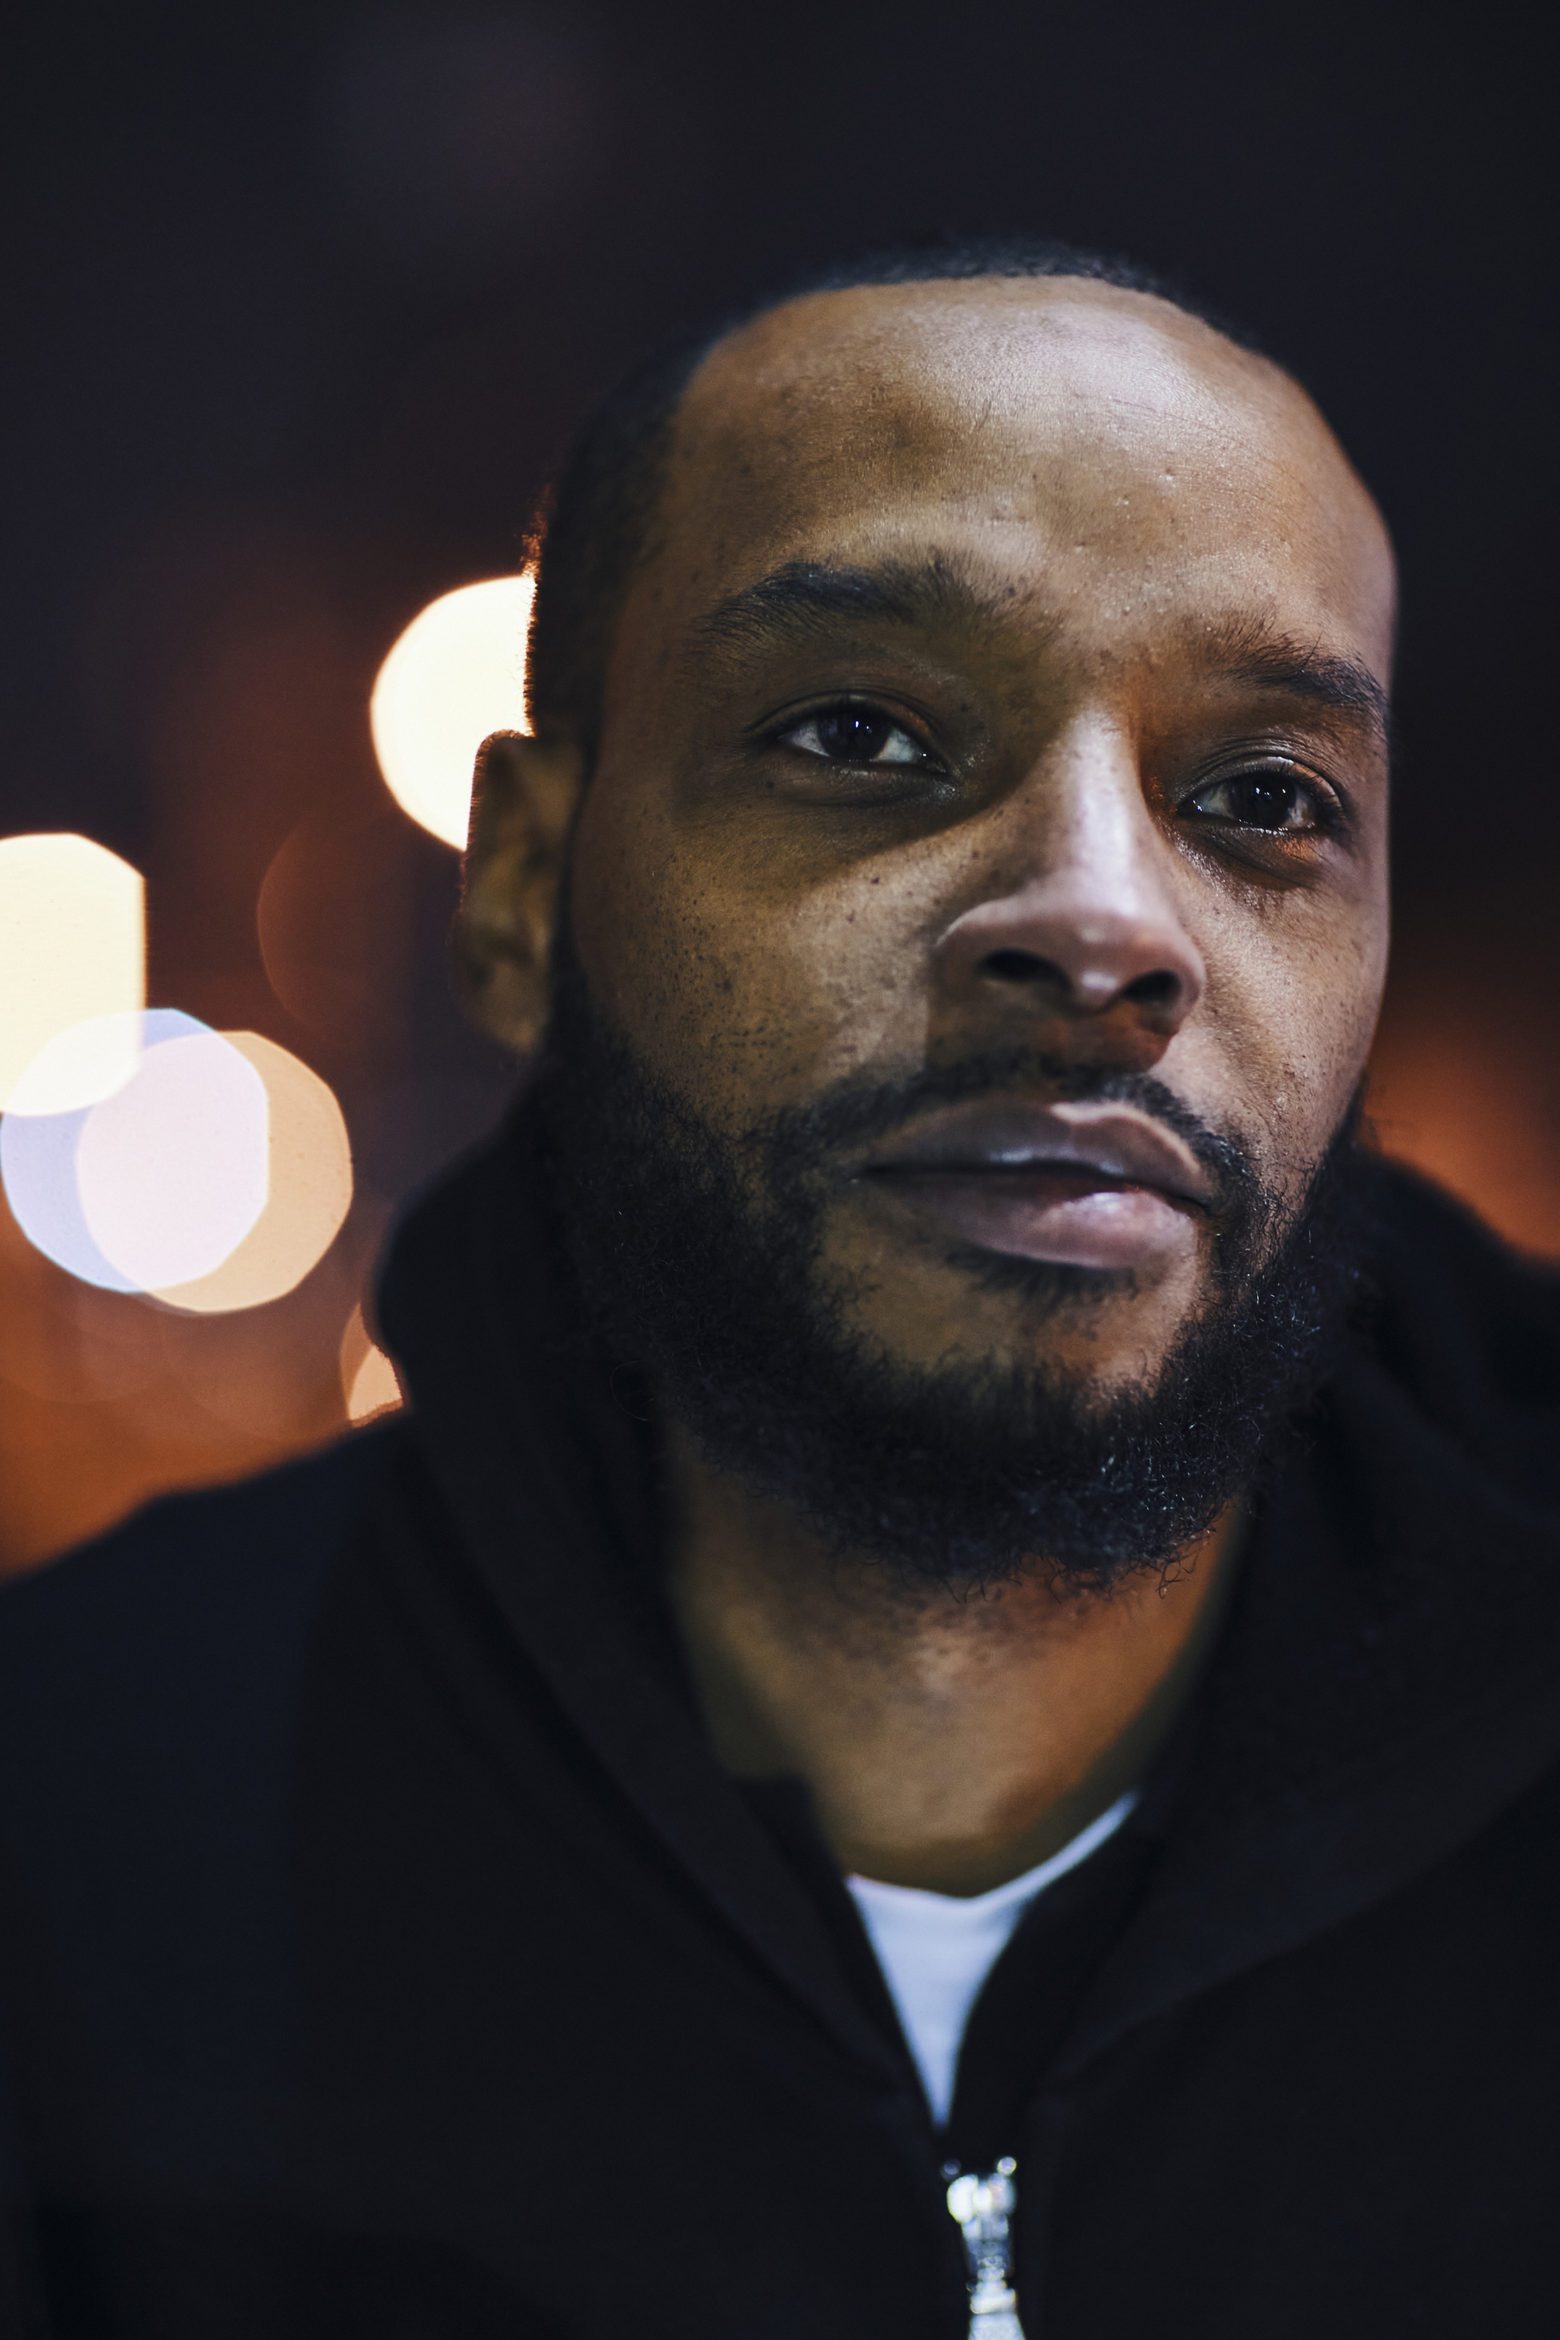 A portrait of Nijeer Parks in Patterson, N.J. on Dec. 28, 2020. Parks is the third person known to be arrested for a crime he did not commit based on a bad face recognition match.